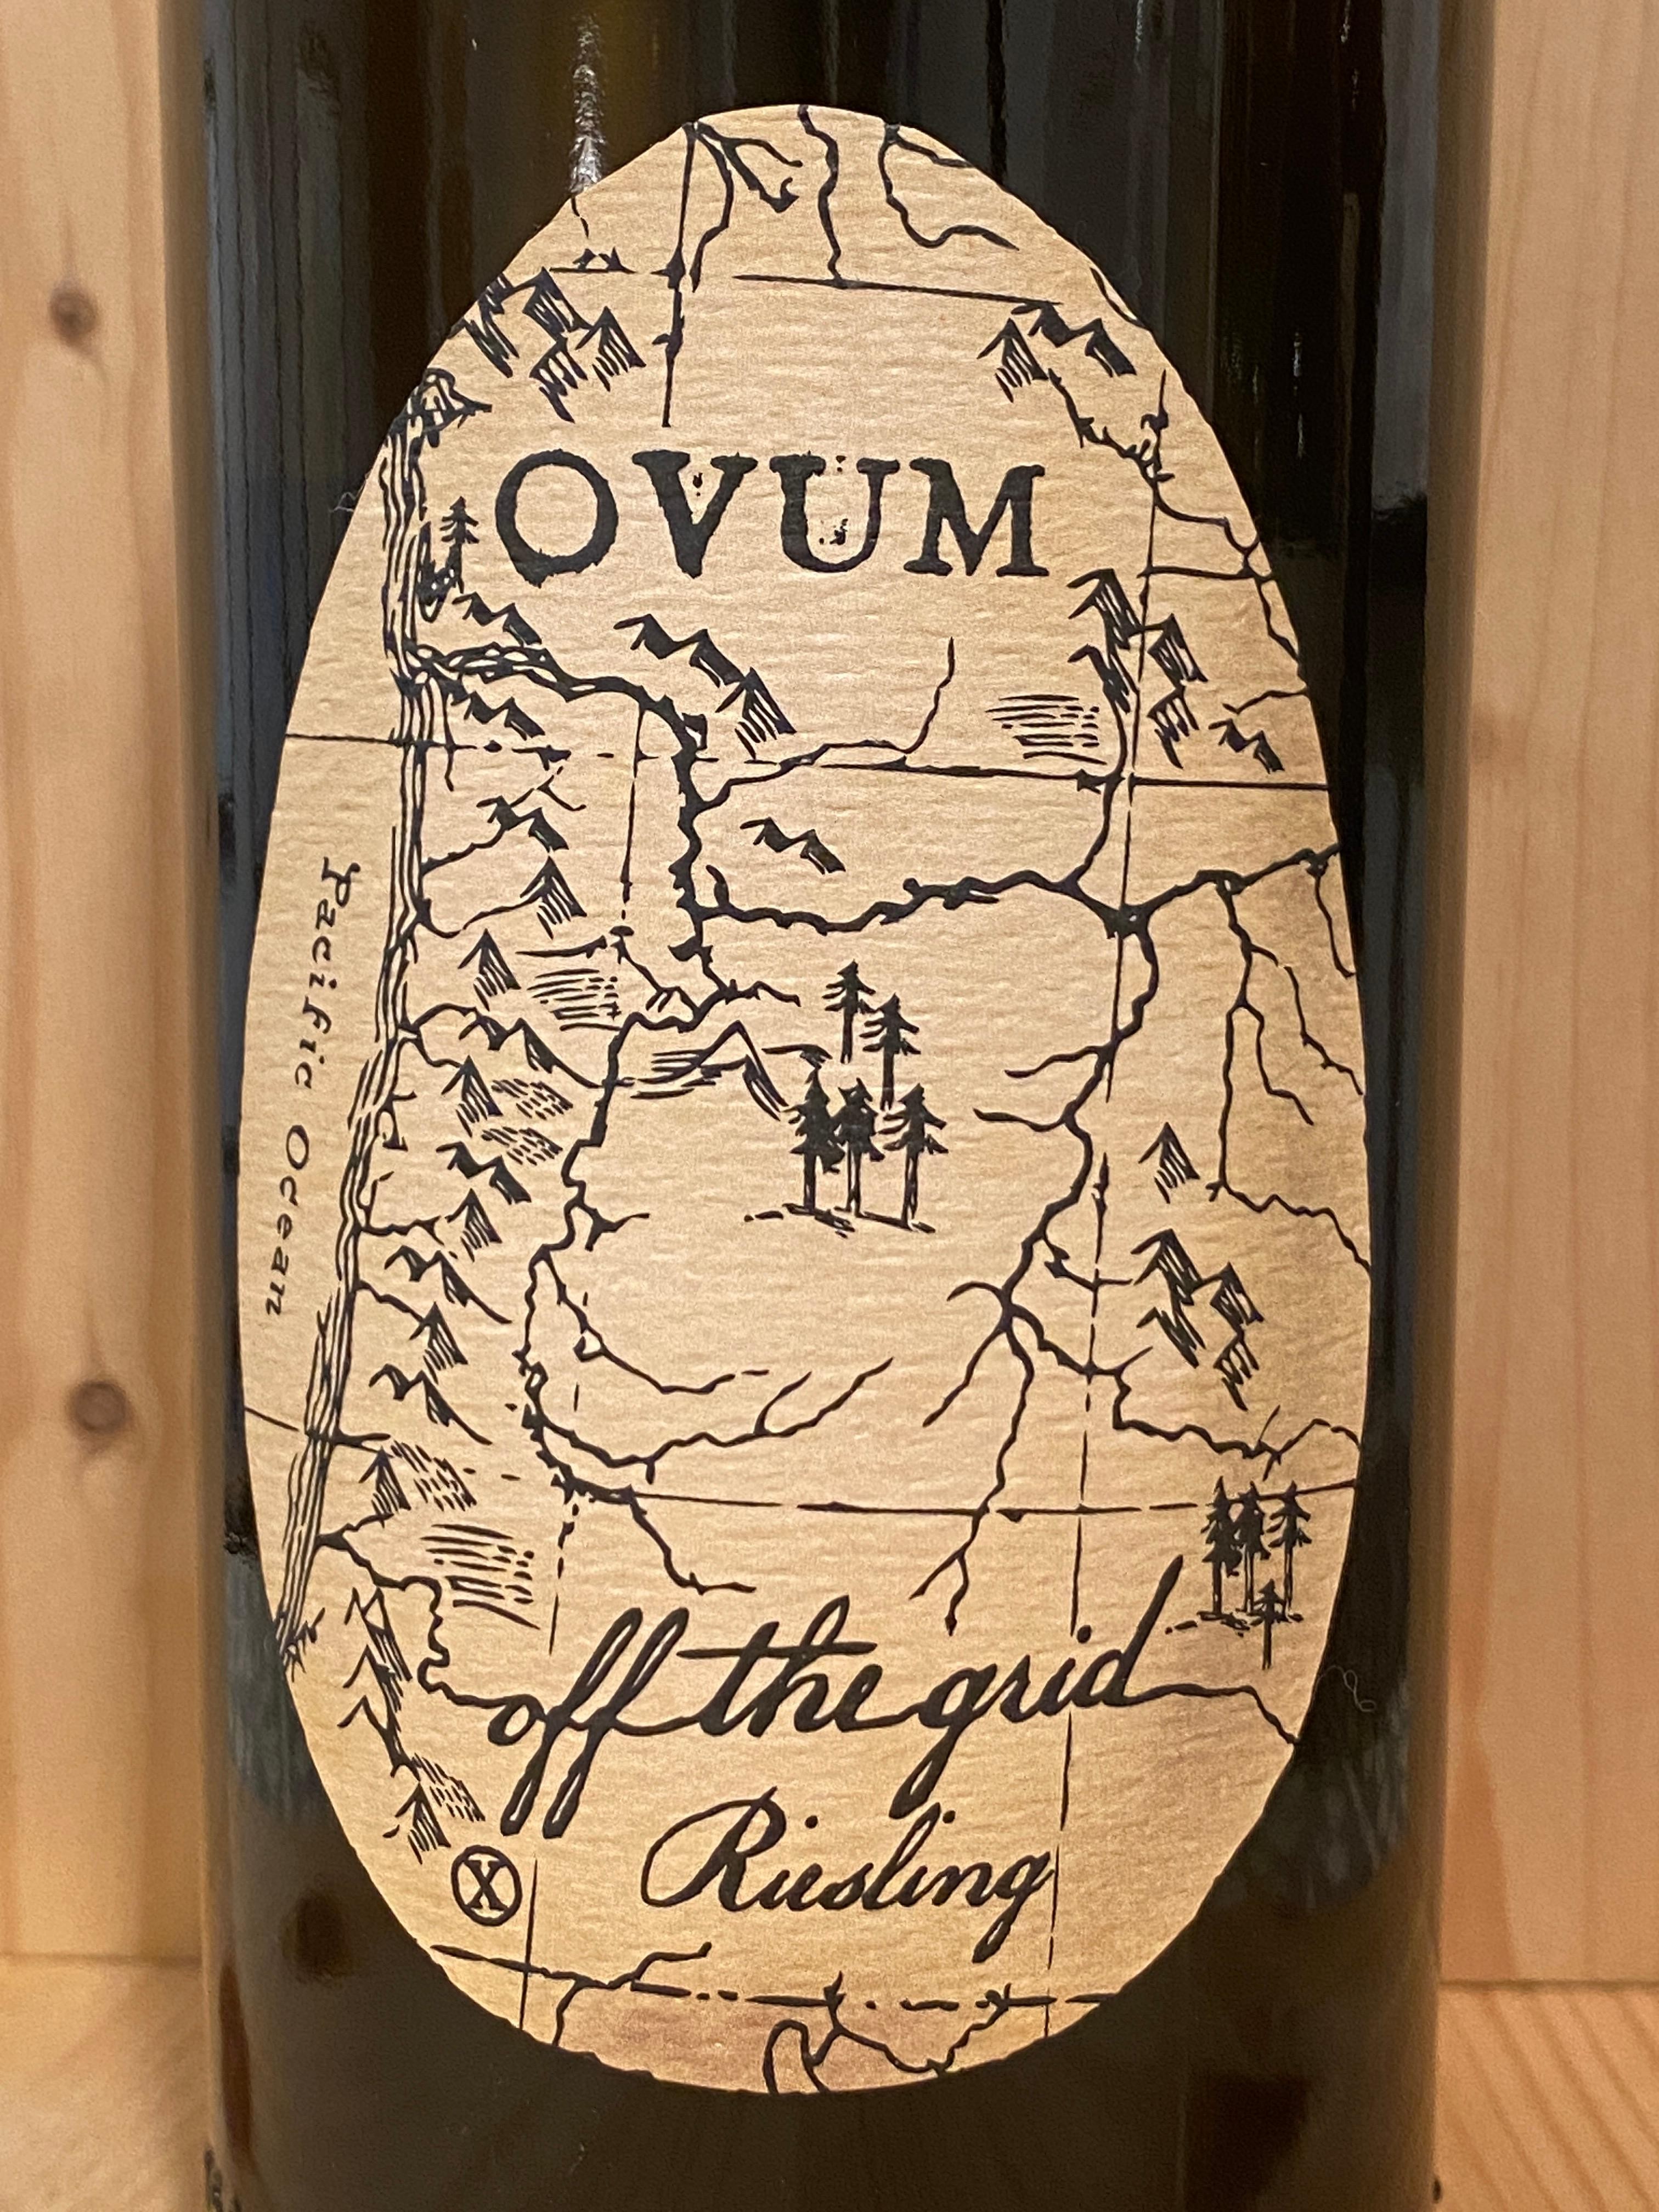 Ovum "Off the Grid" Riesling 2021: Rogue Valley, Oregon